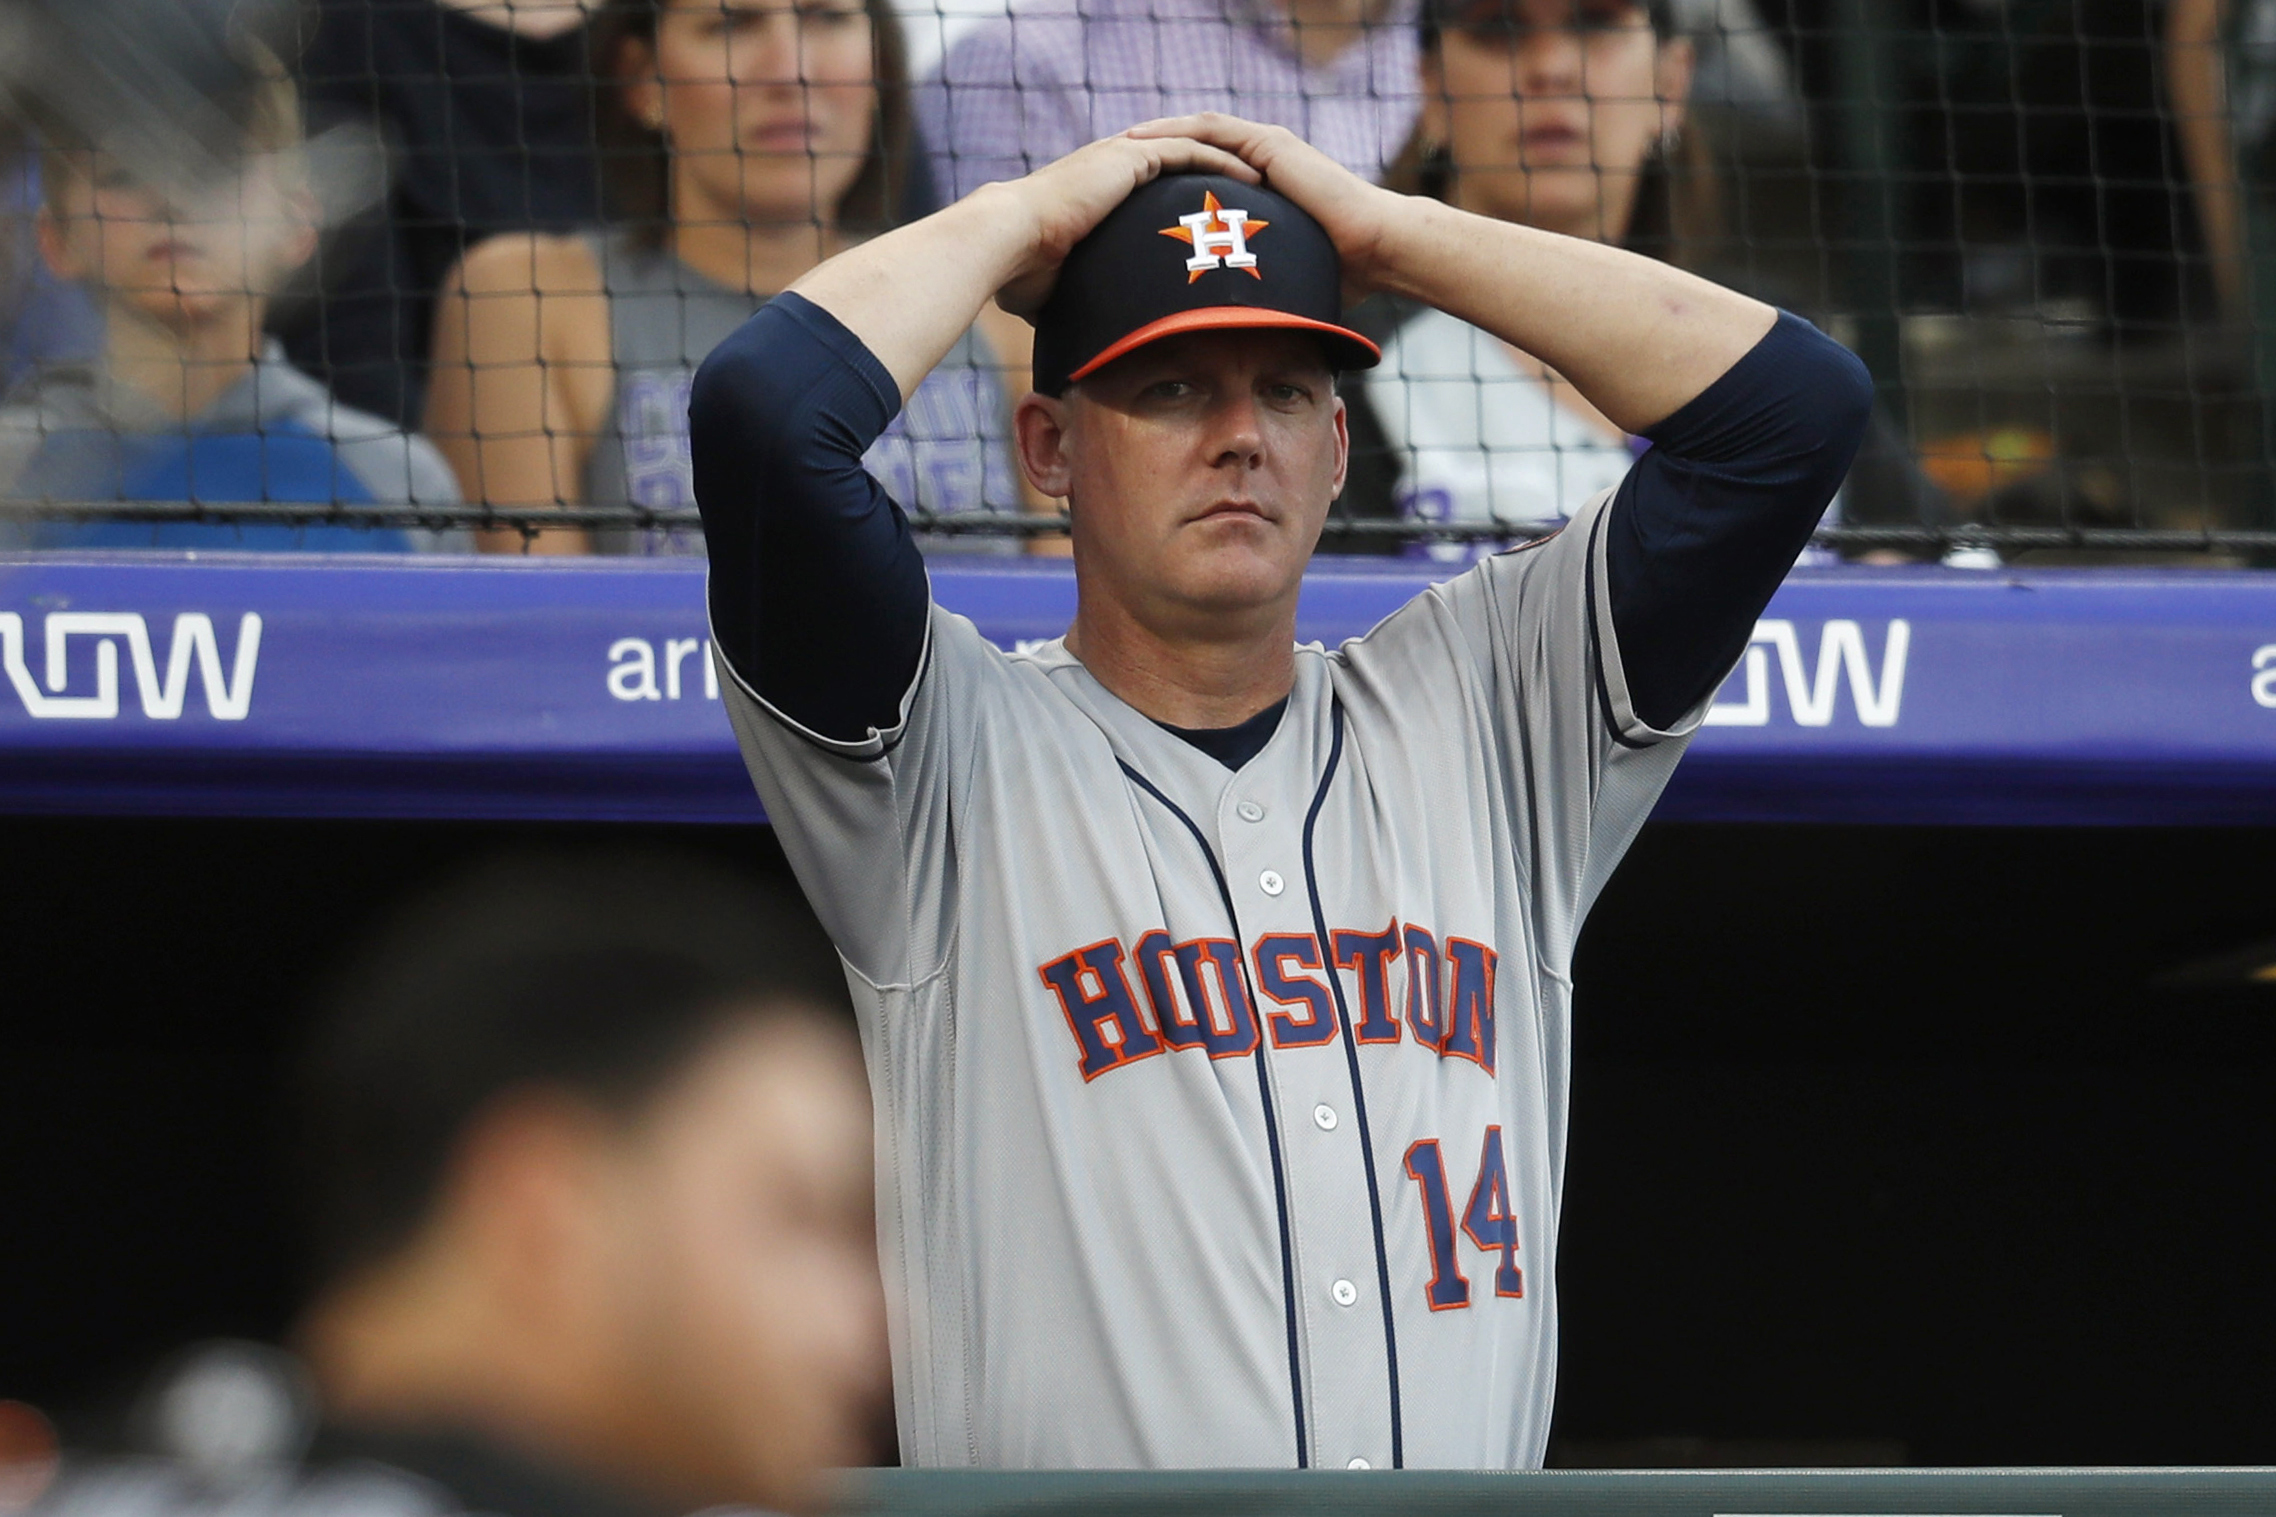 PHOTO: Houston Astros manager AJ Hinch reacts during a baseball game against the Colorado Rockies, in Denver, July 19, 2019.